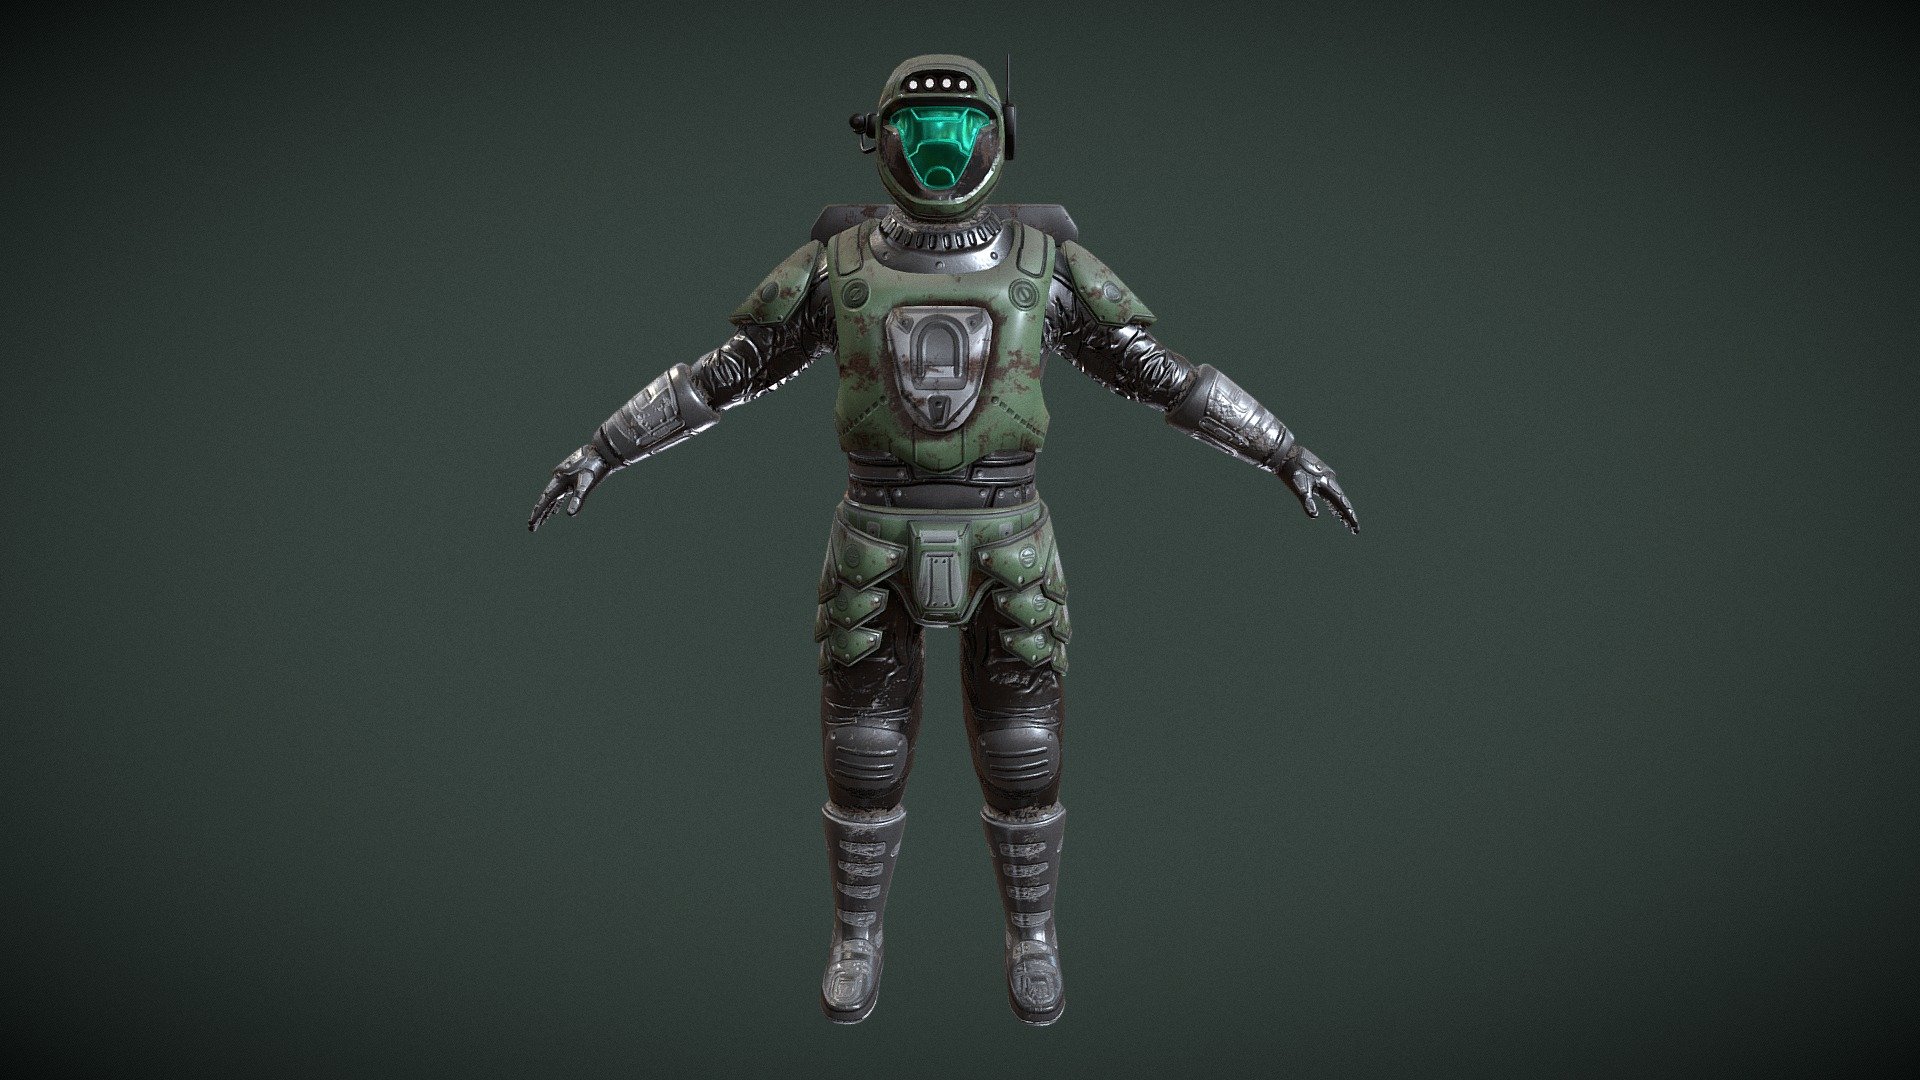 Sci-fi Military Astronaut Character - Model/Art by Outworld Studios

Must give credit to Outworld Studios if using this asset

Show support by joining my discord: https://discord.gg/EgWSkp8Cxn - Sci-fi Military Astronaut Character - Buy Royalty Free 3D model by Outworld Studios (@outworldstudios) 3d model